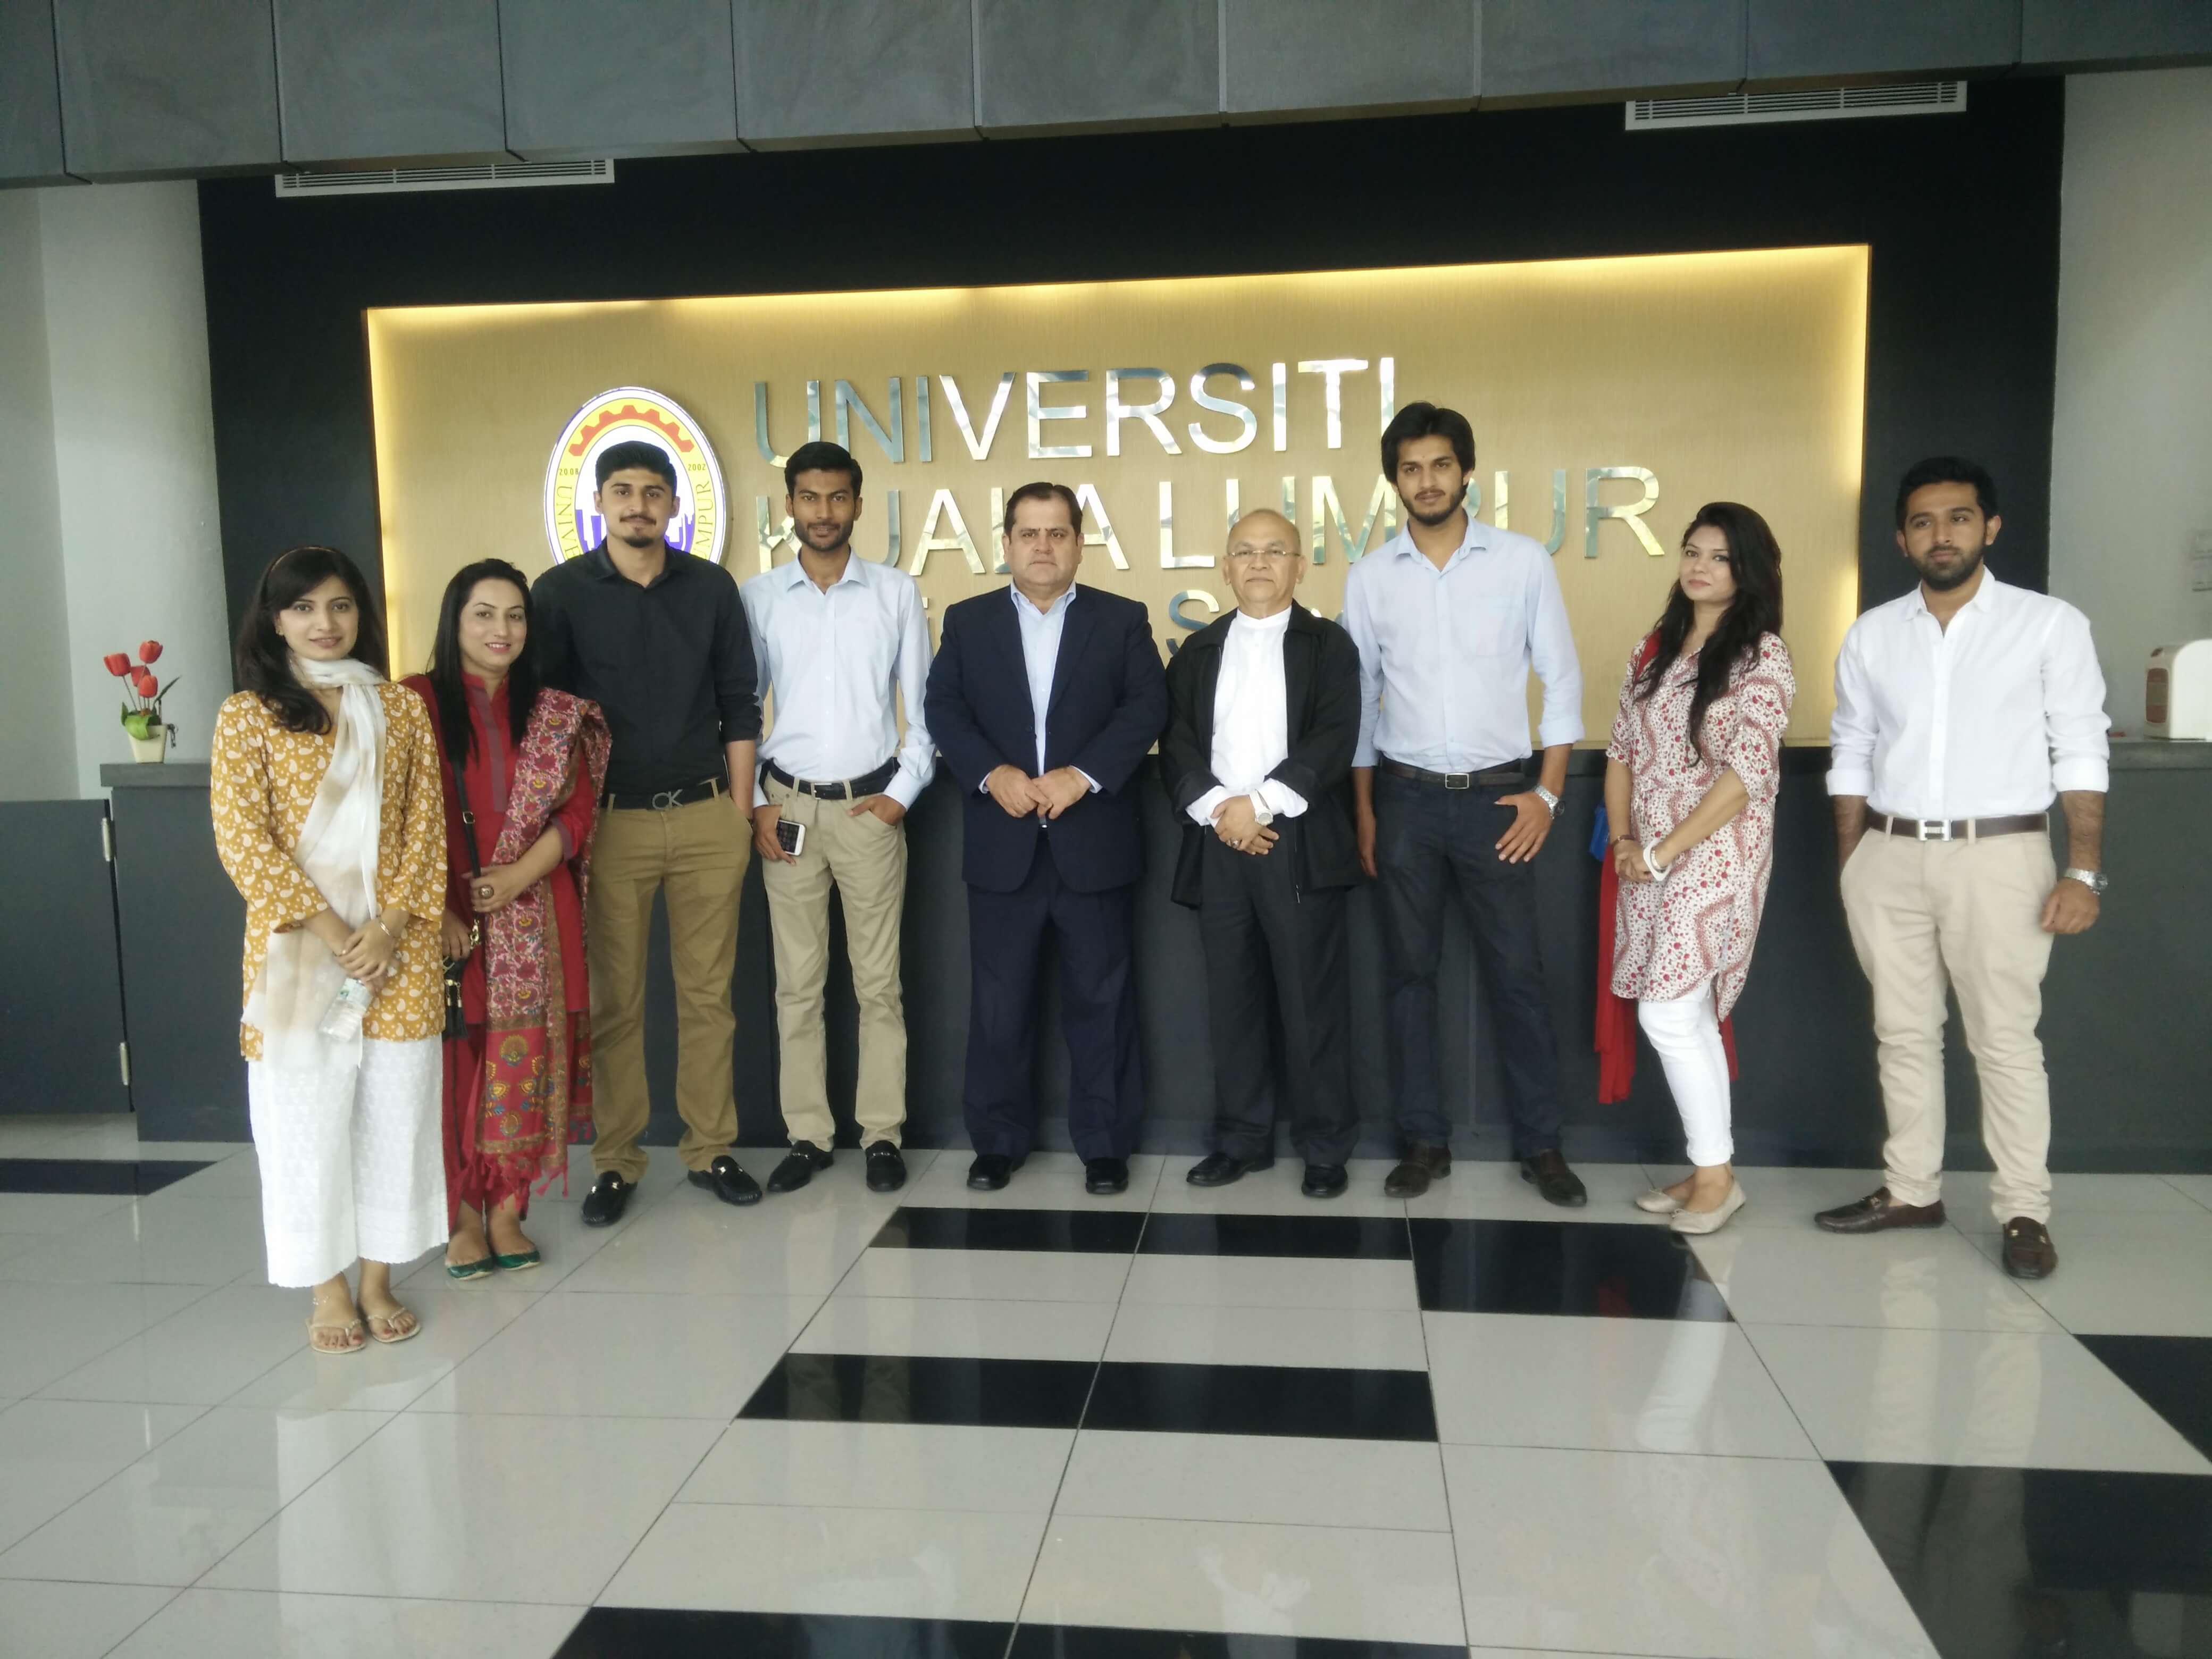 Visit from dhaka students